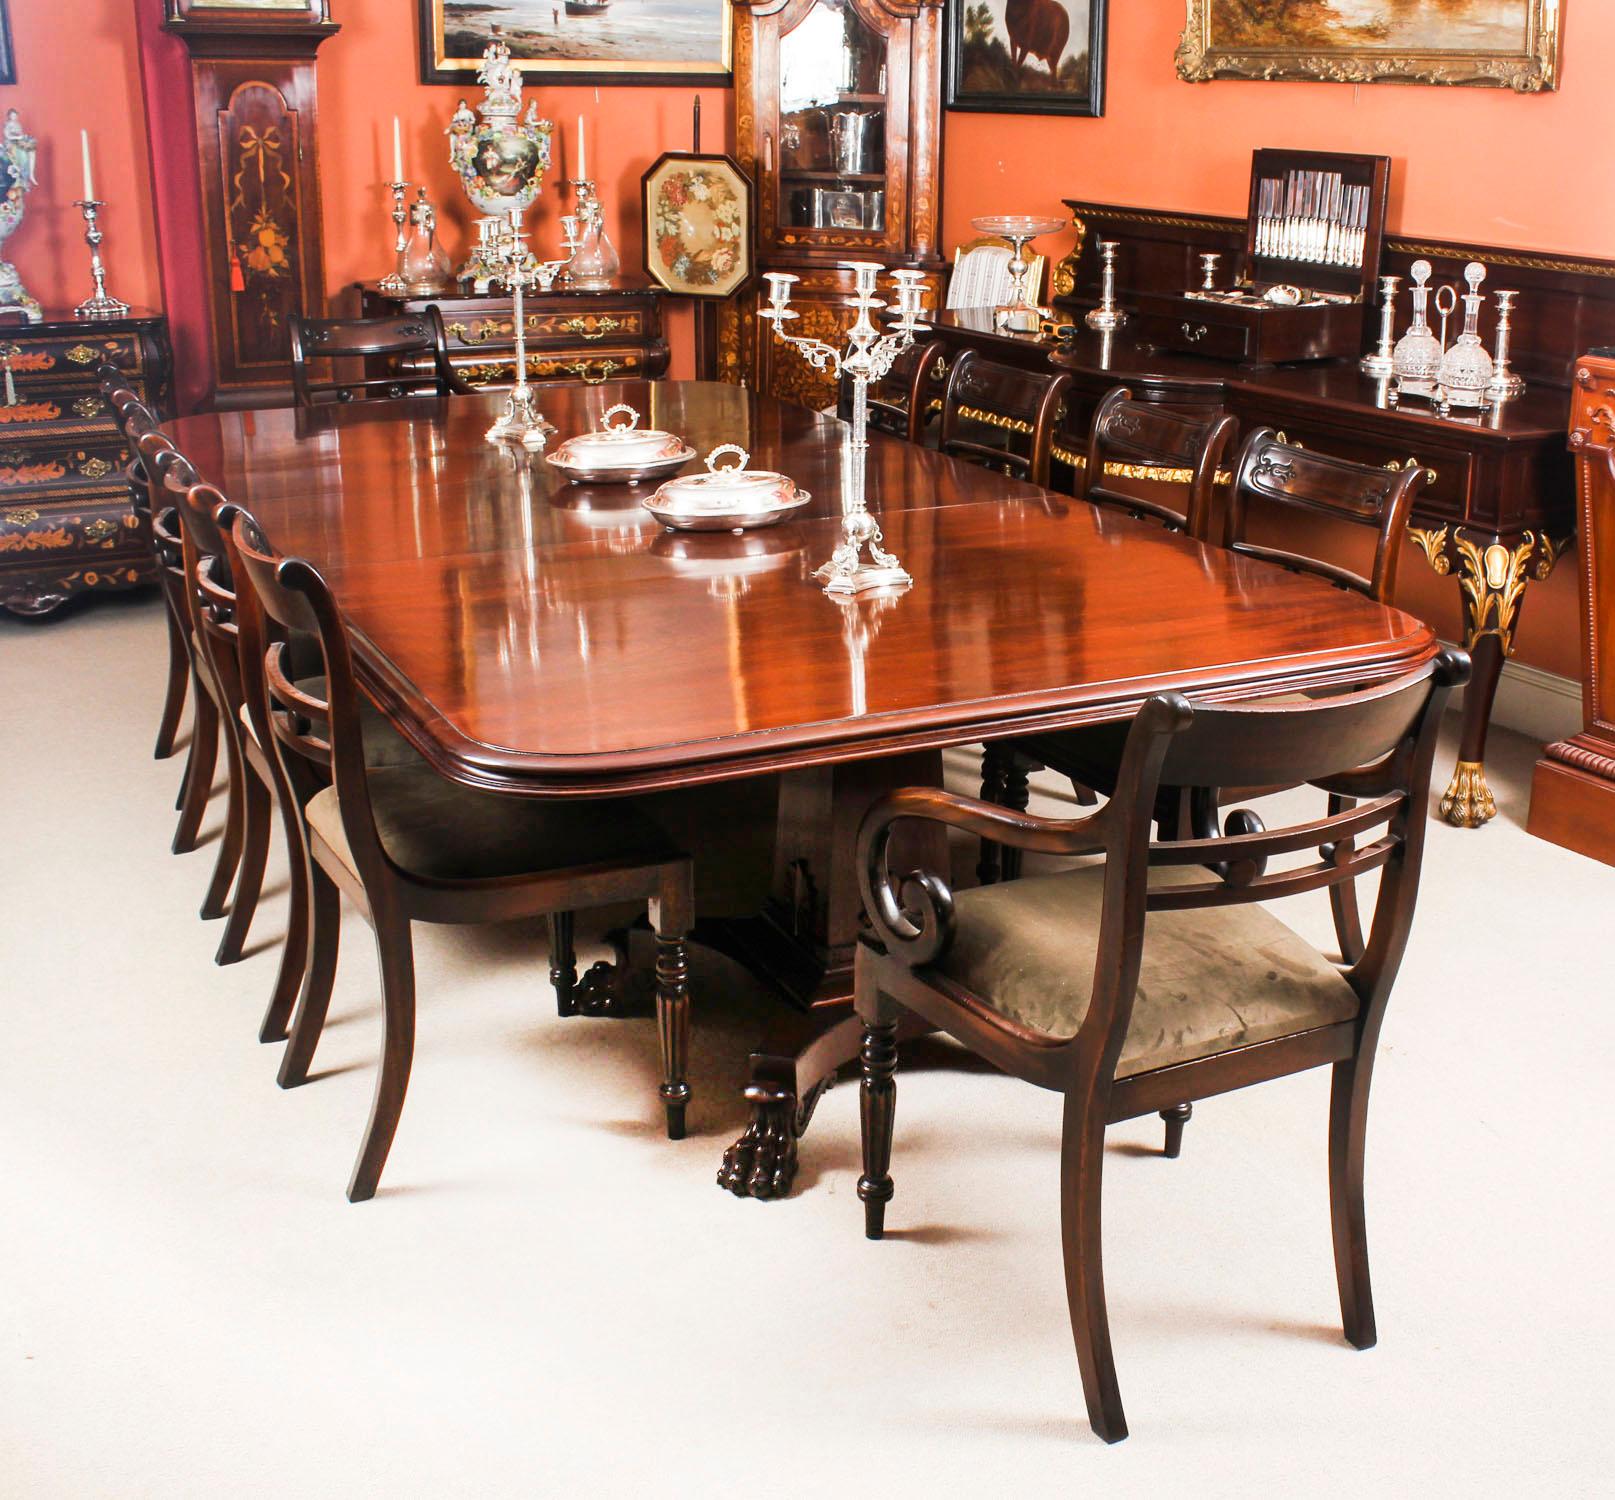 English Antique George III Mahogany Twin Pedestal Dining Table 19th Century & Ten Chairs